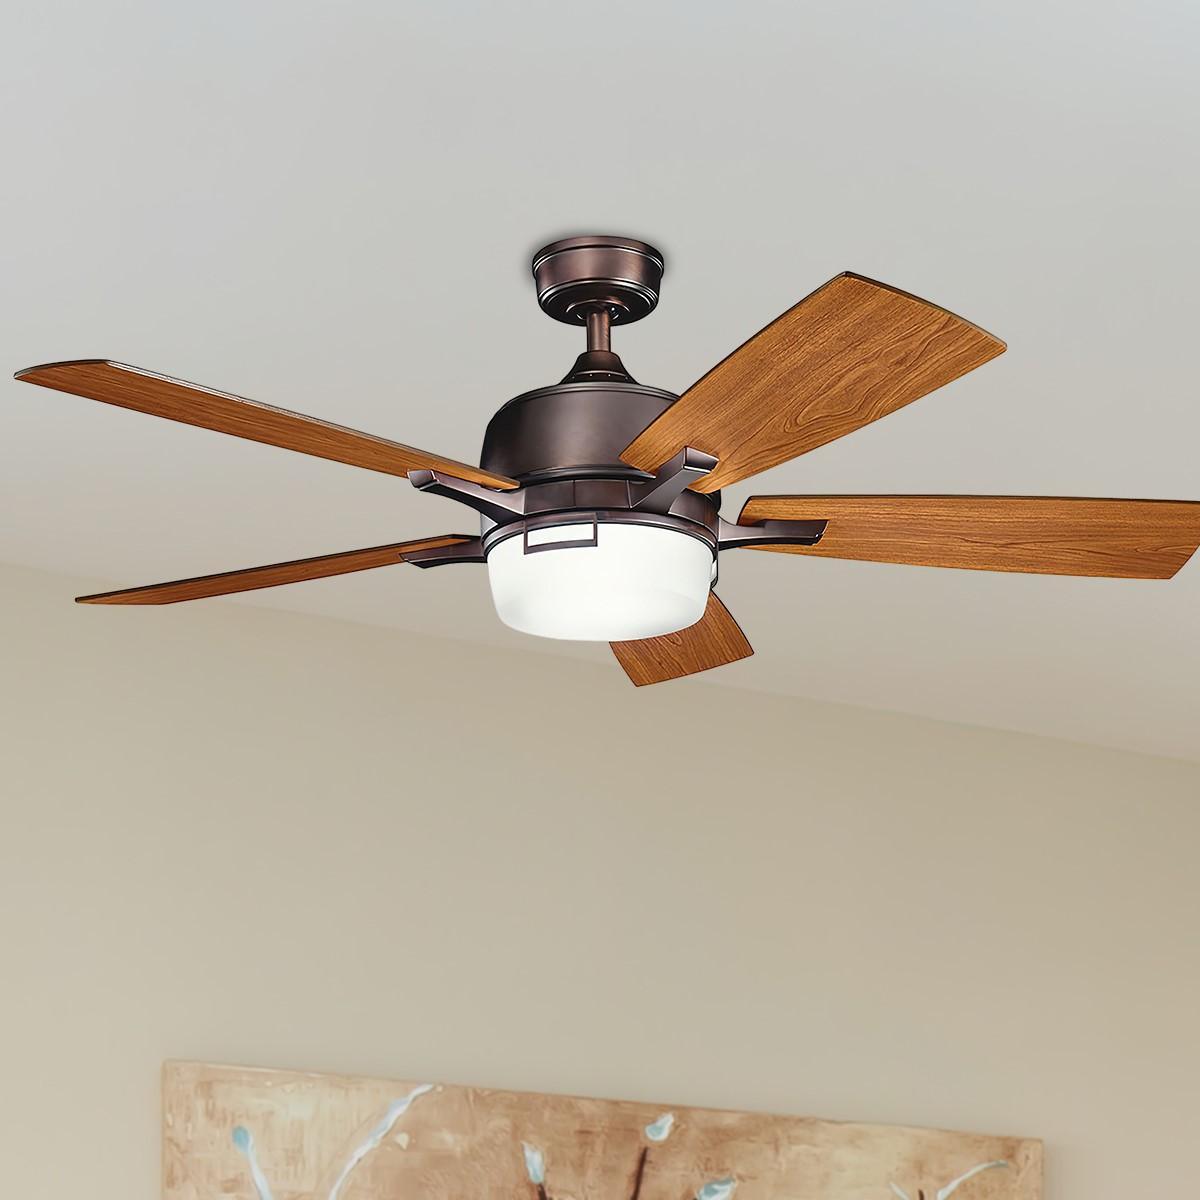 Leeds 52 Inch Ceiling Fan With Light, Wall Control Included - Bees Lighting